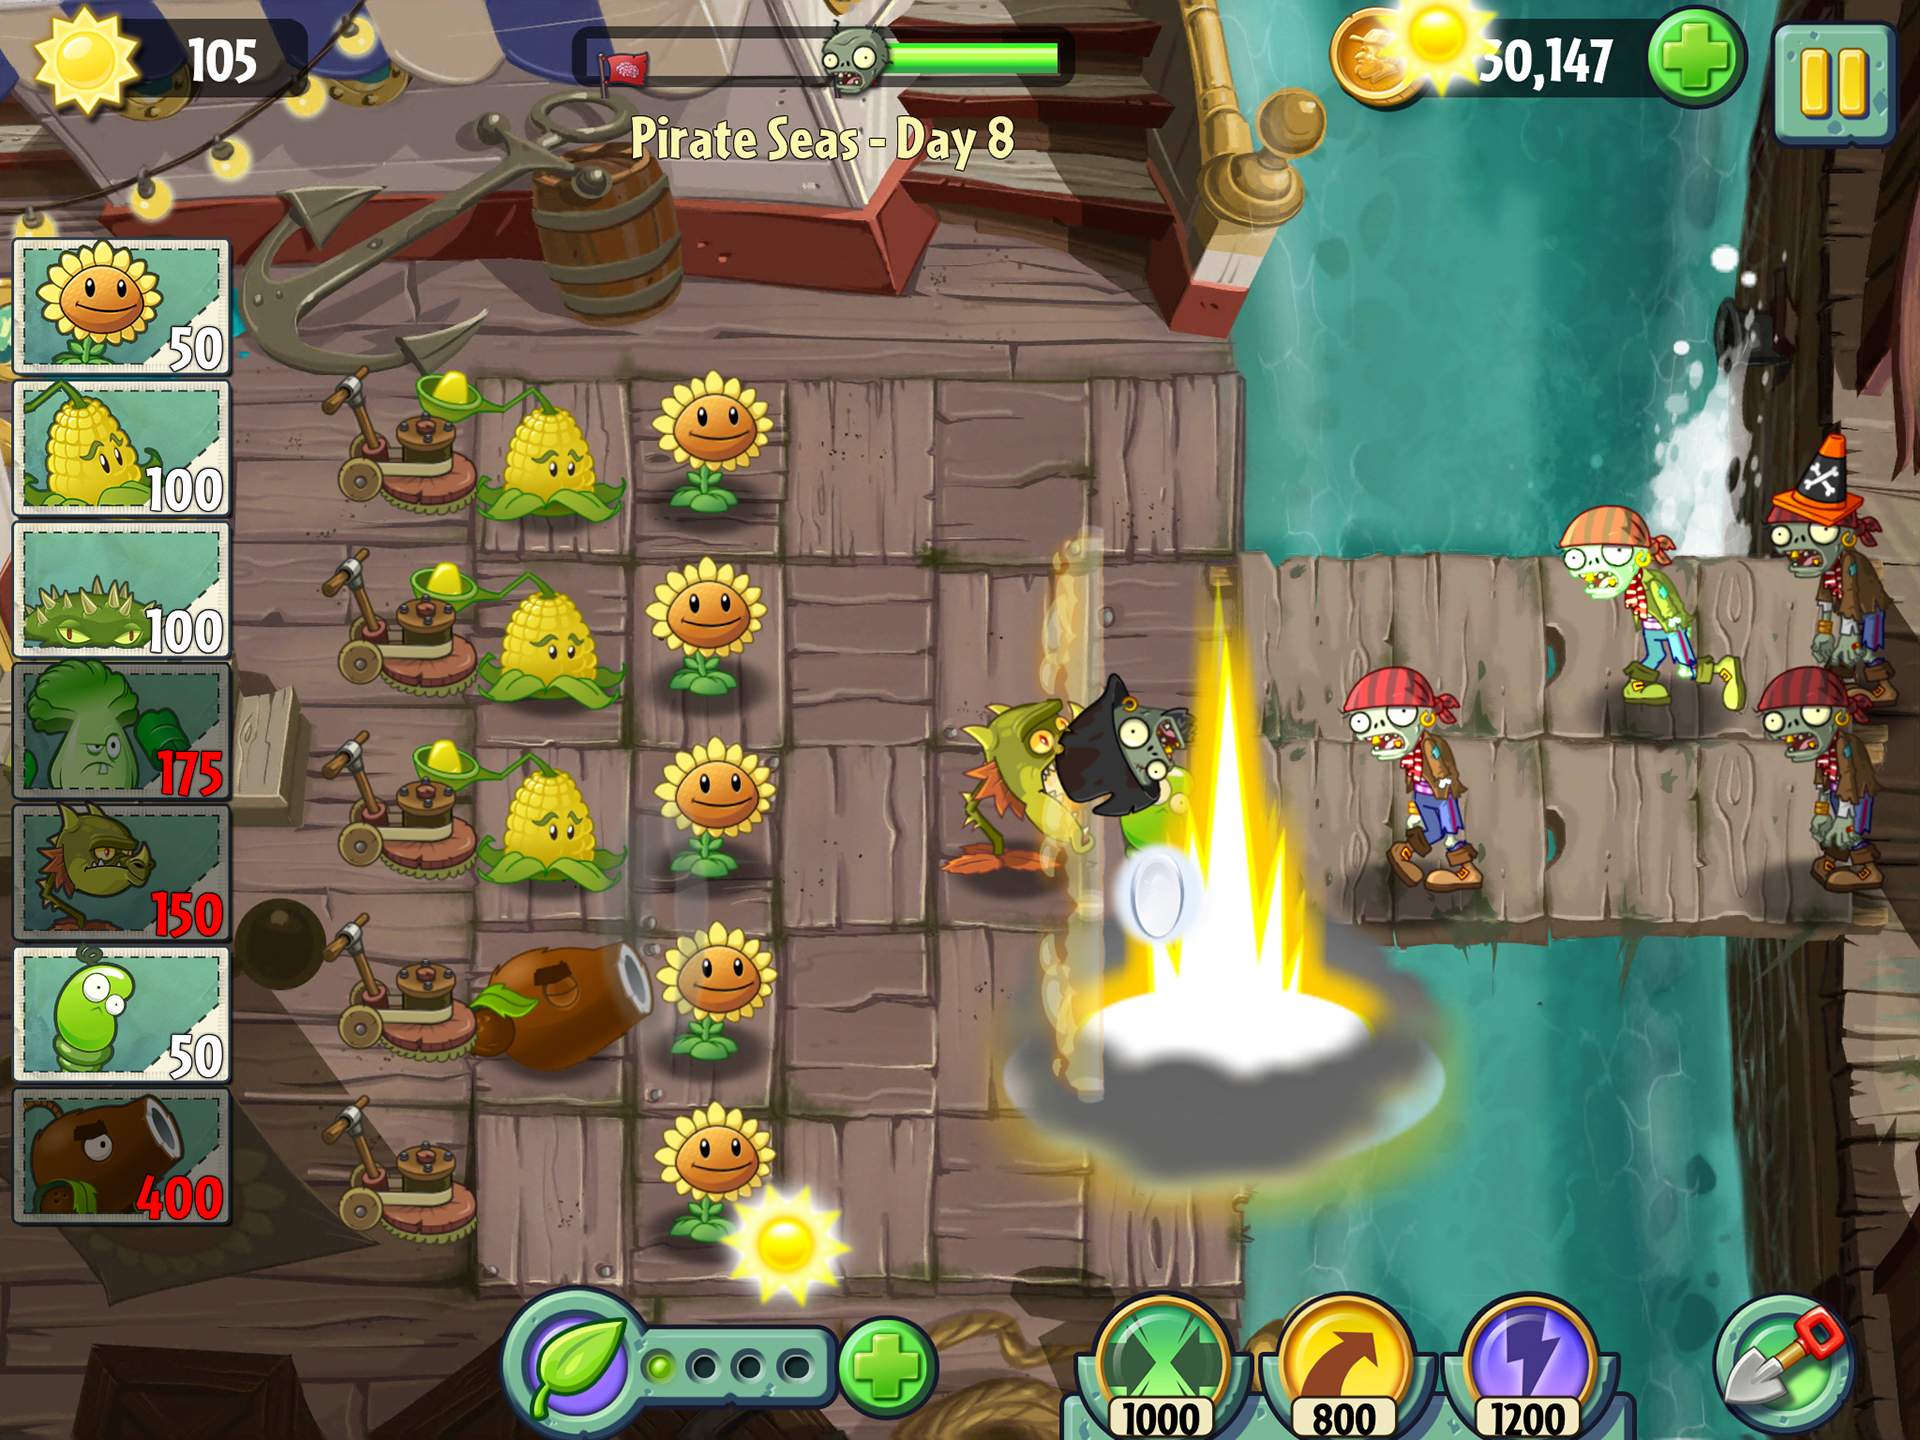 Plants vs. Zombies 2 Review: Free-to-play that's better without paying